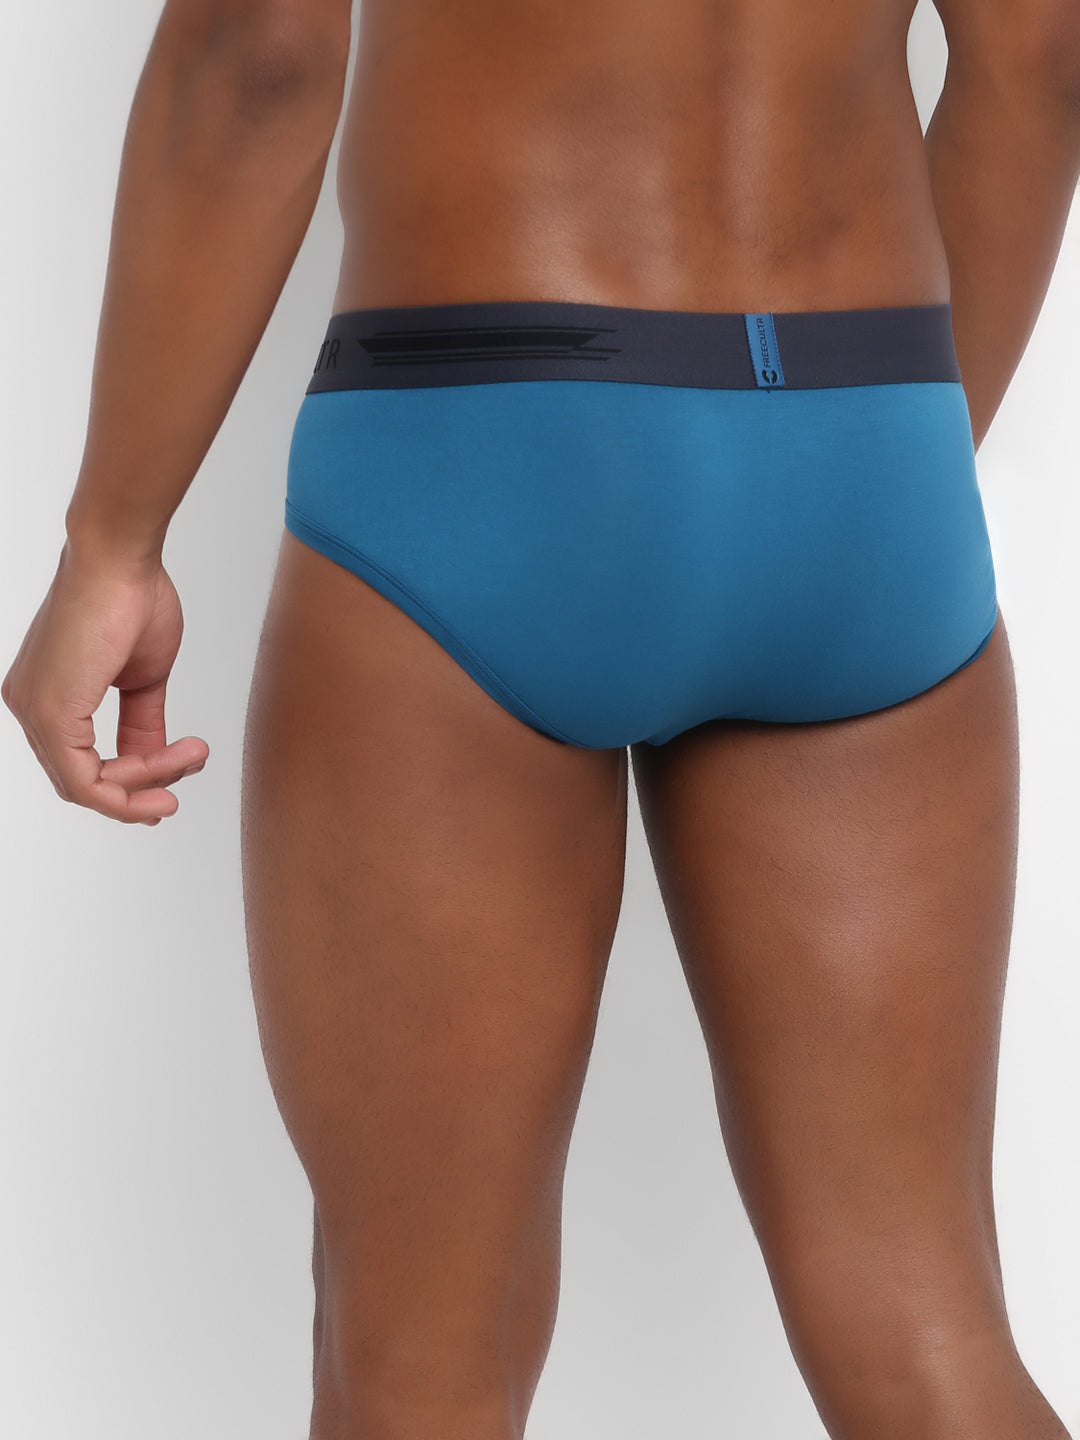 Men's Micro Modal & Elastane Brief in Contrast Waistband (Pack of 2) - freecultr.com